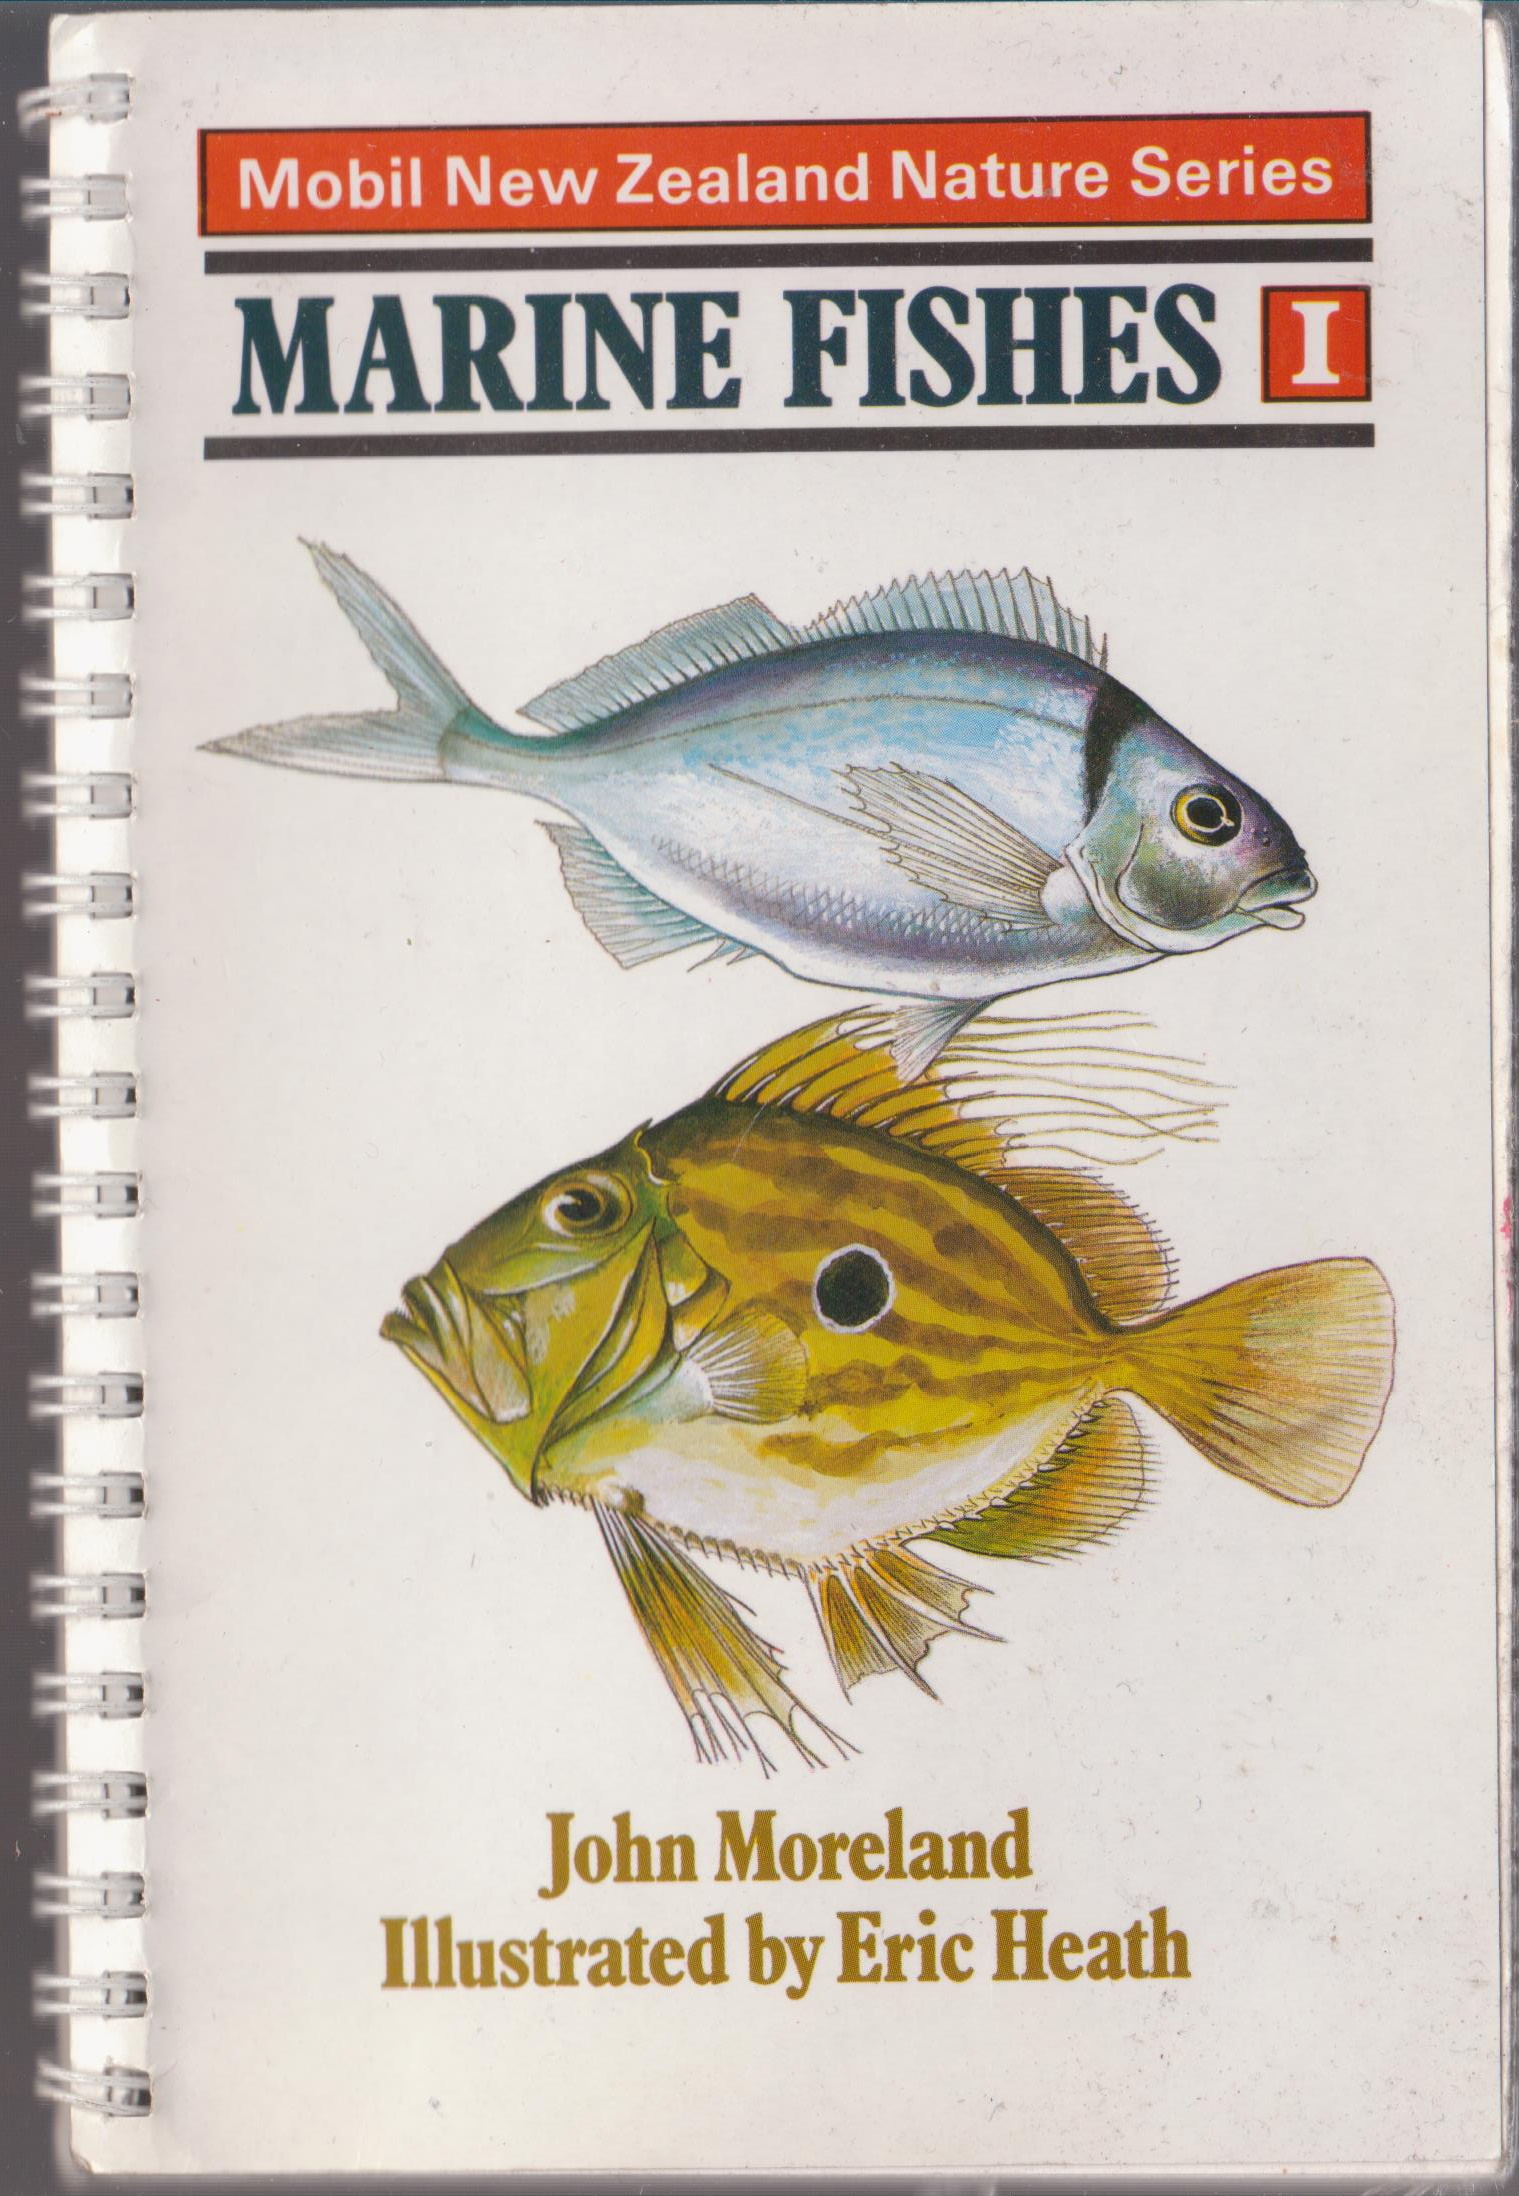 cover image of Mobil New Zealand Nature Series Marine Fishes 1, for sale in New Zealand 